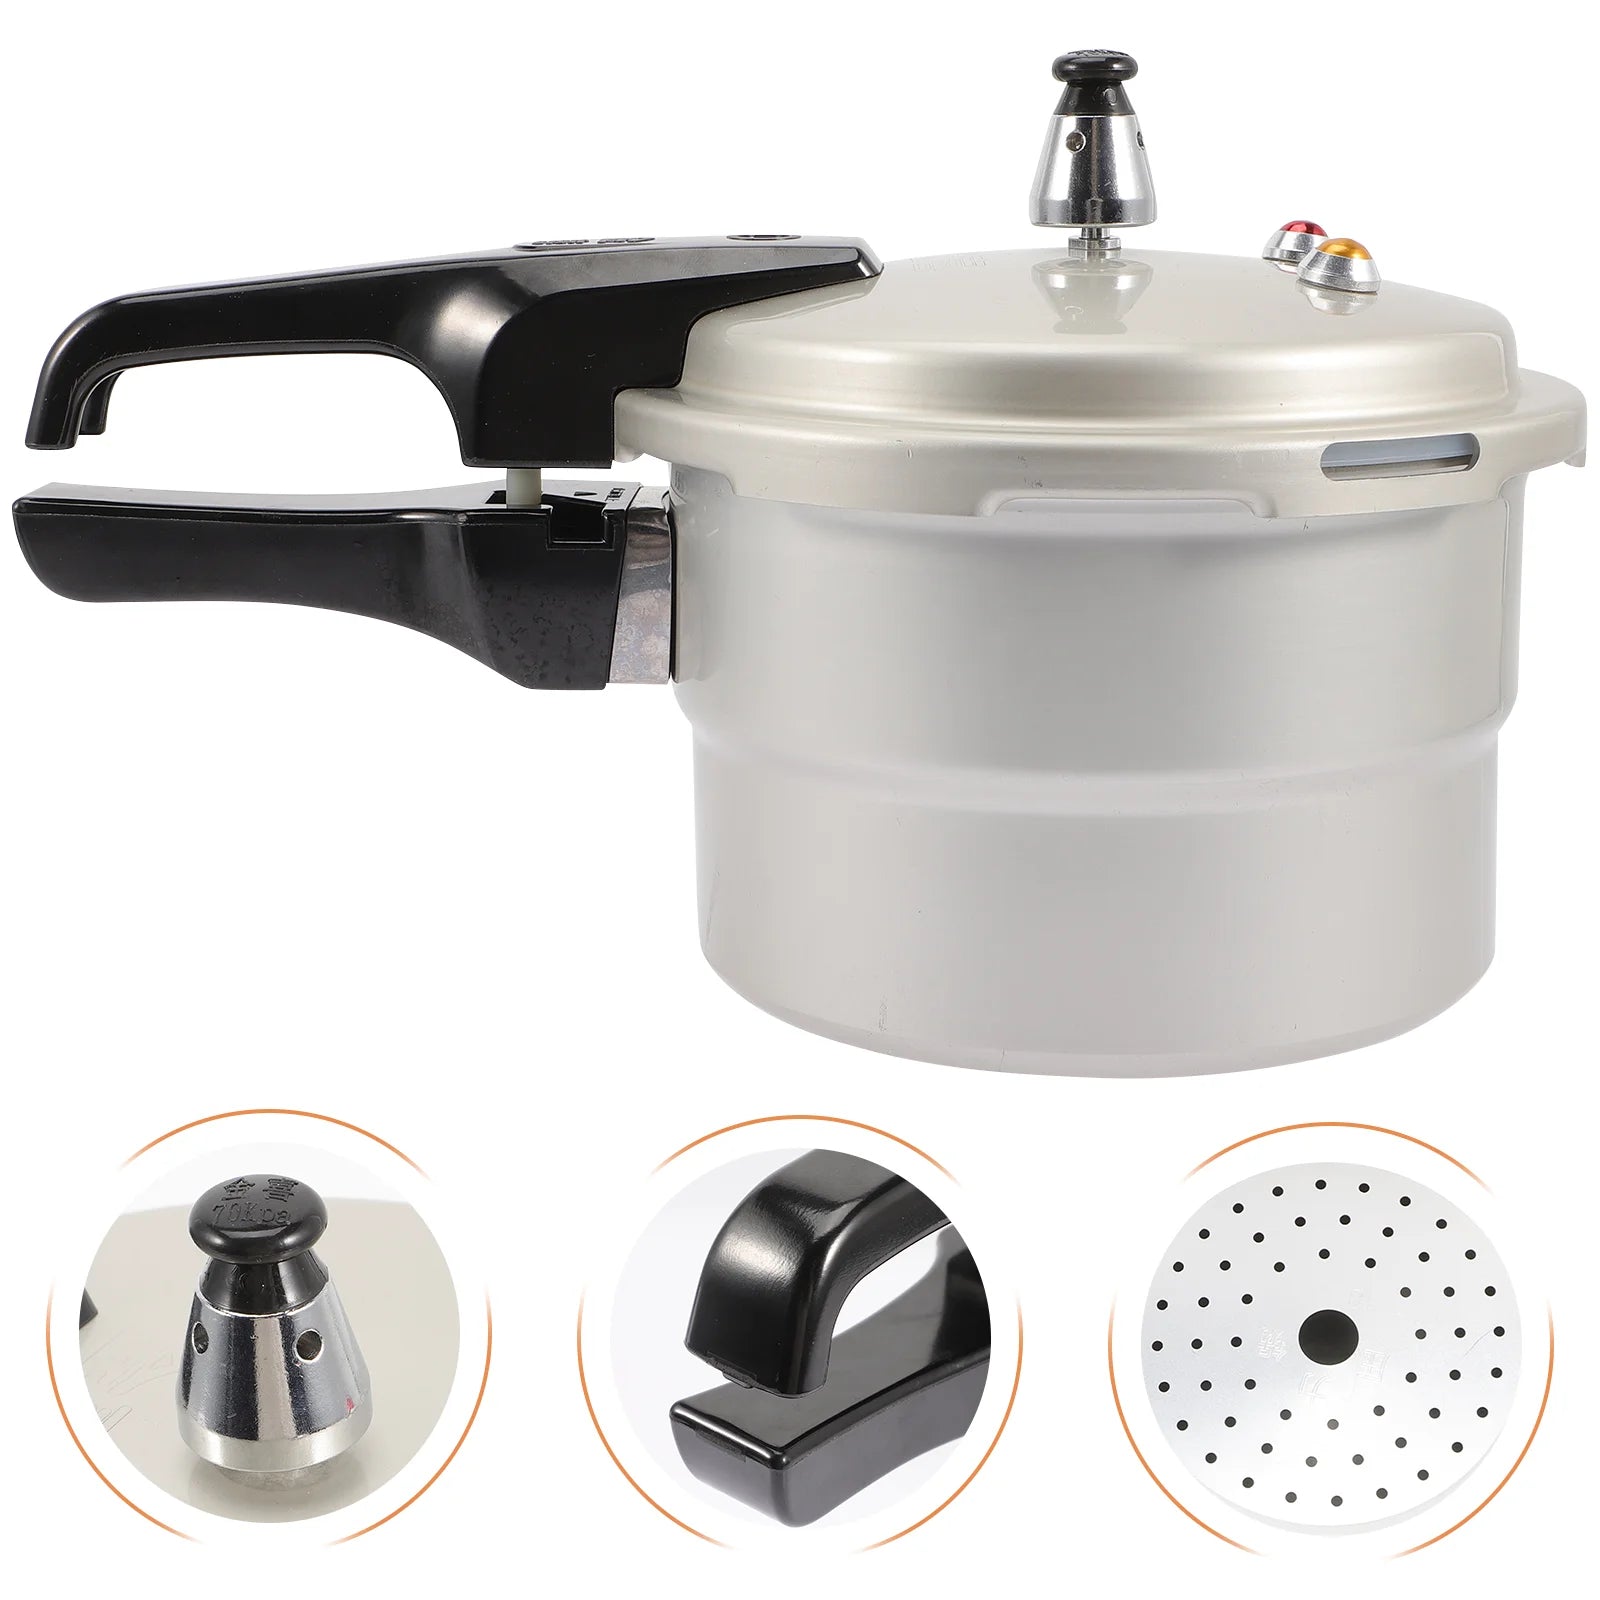 Pressure Cooker Efficient Kitchen Pot Dropshipping Food-grade Aluminum Restaurant Gas Stove Cooking Electric oven